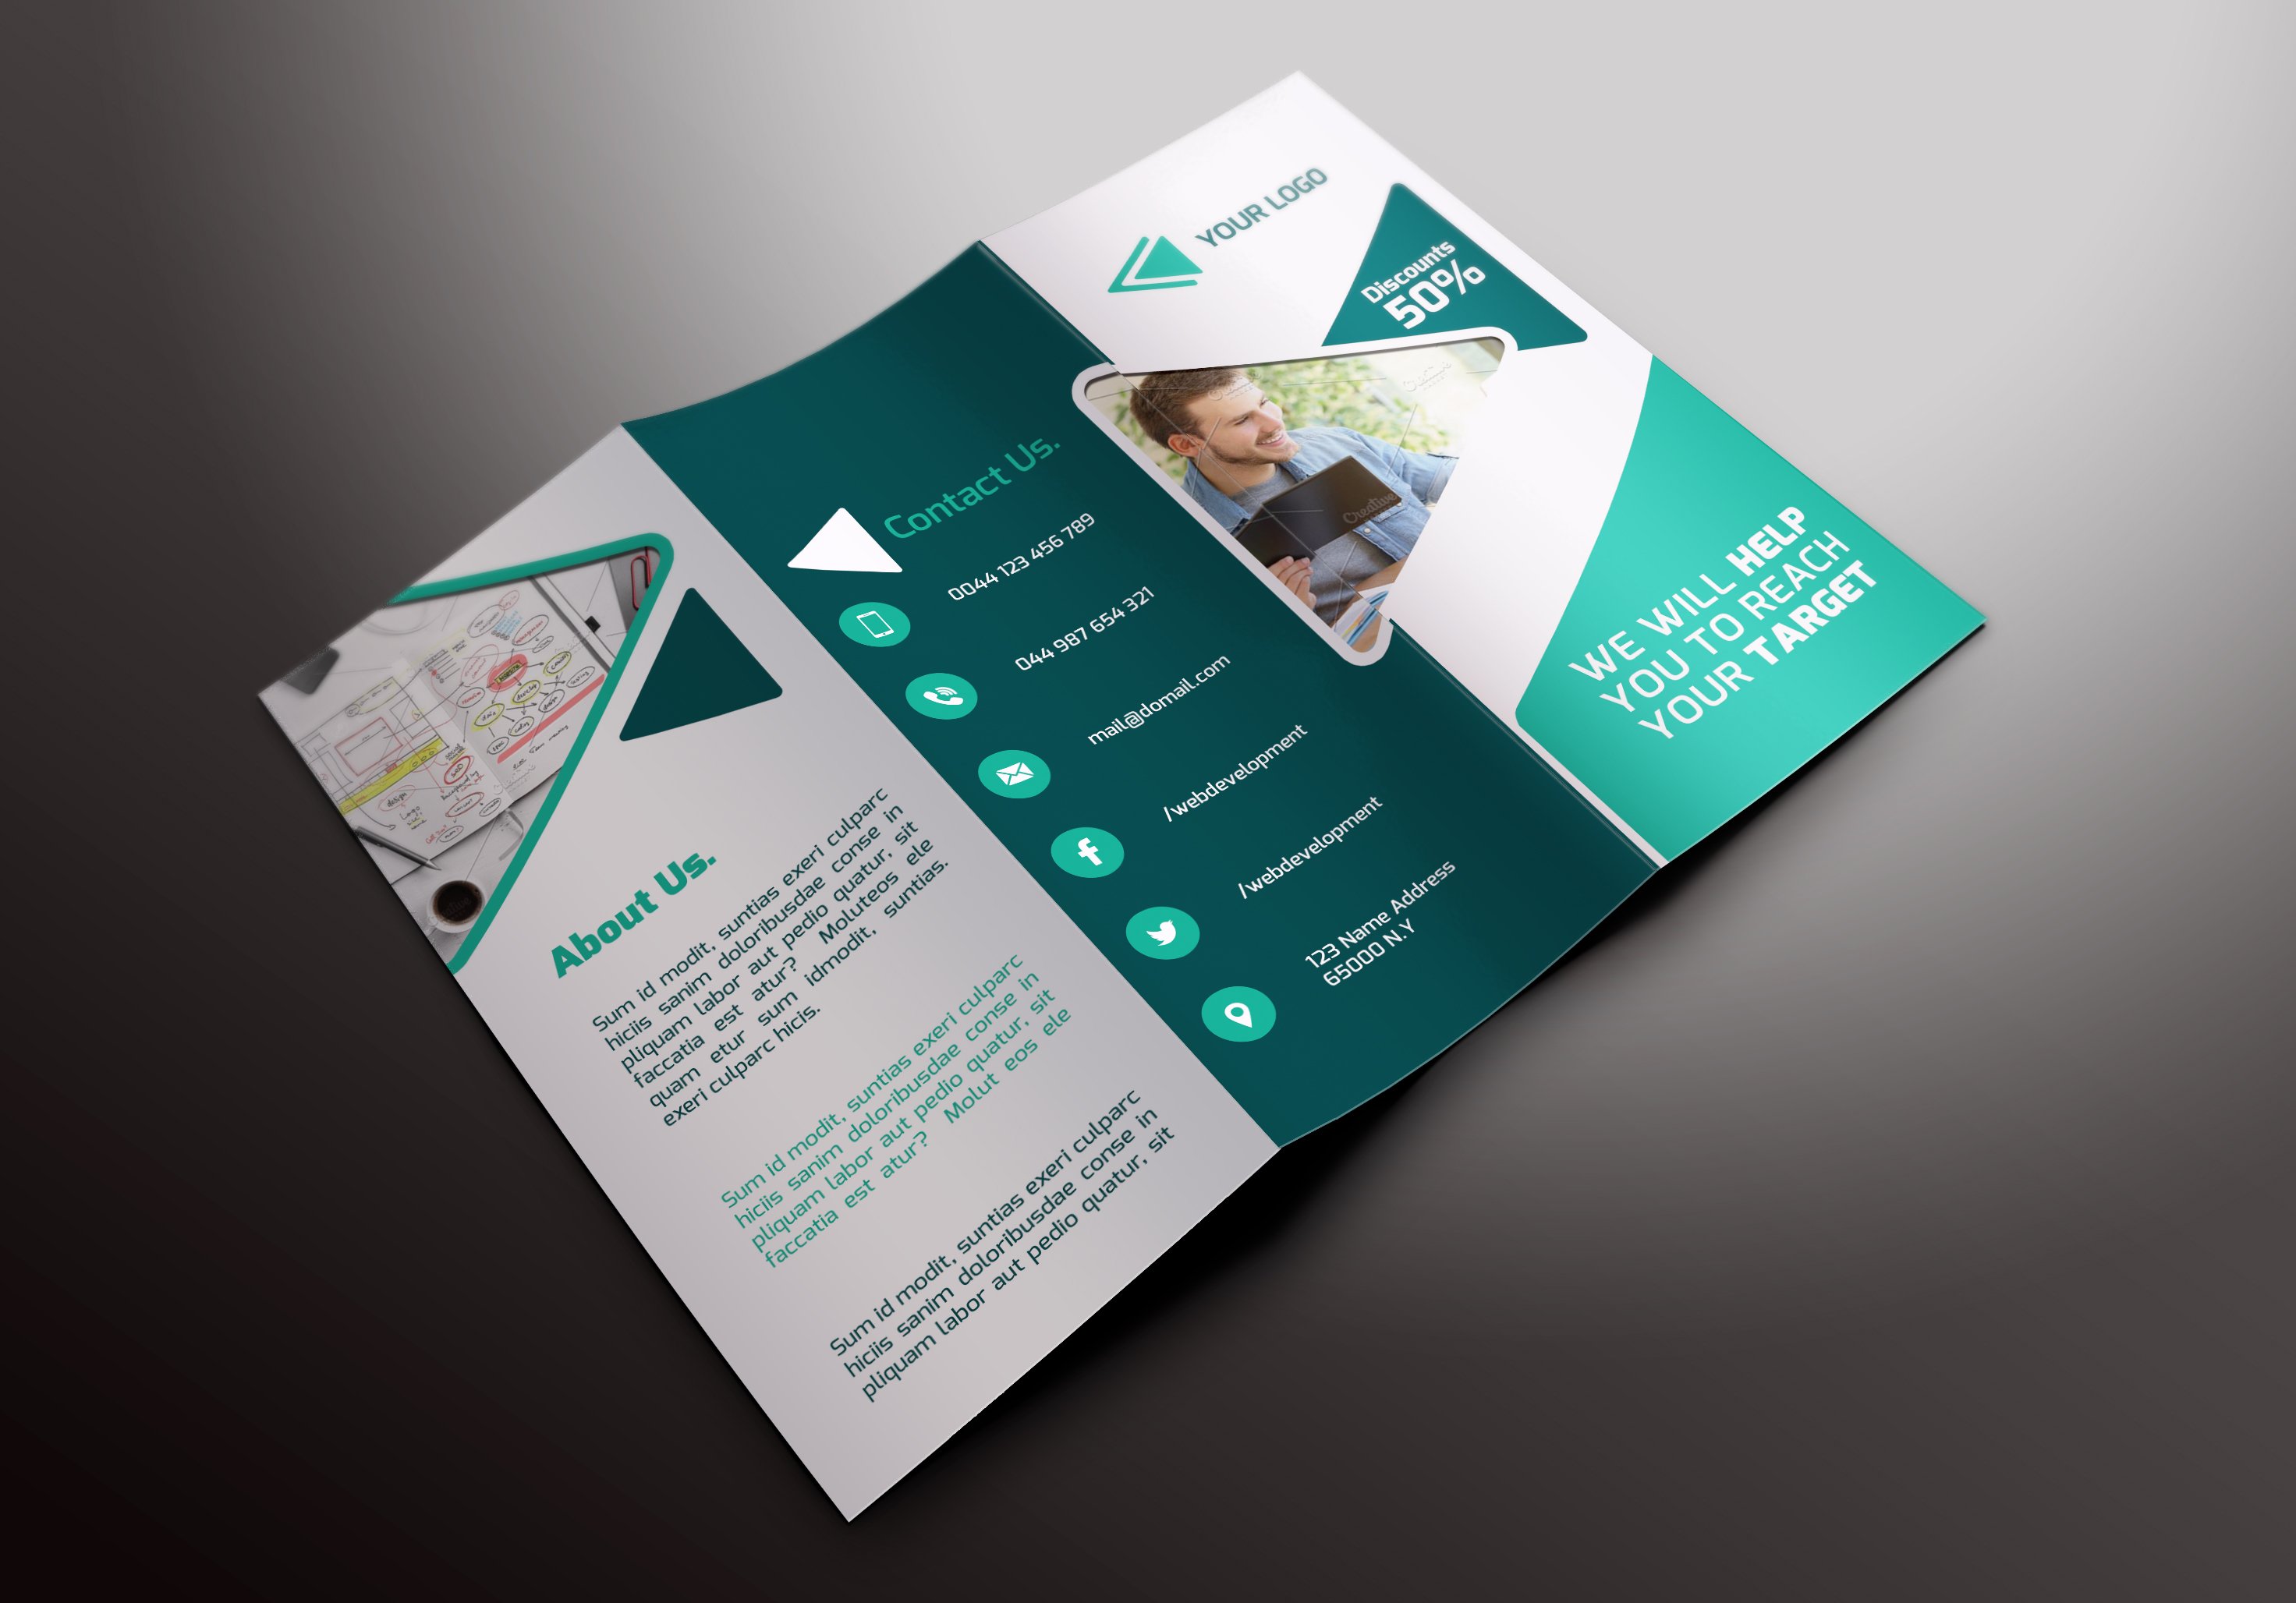 IT Services Tri-fold Brochures cover image.